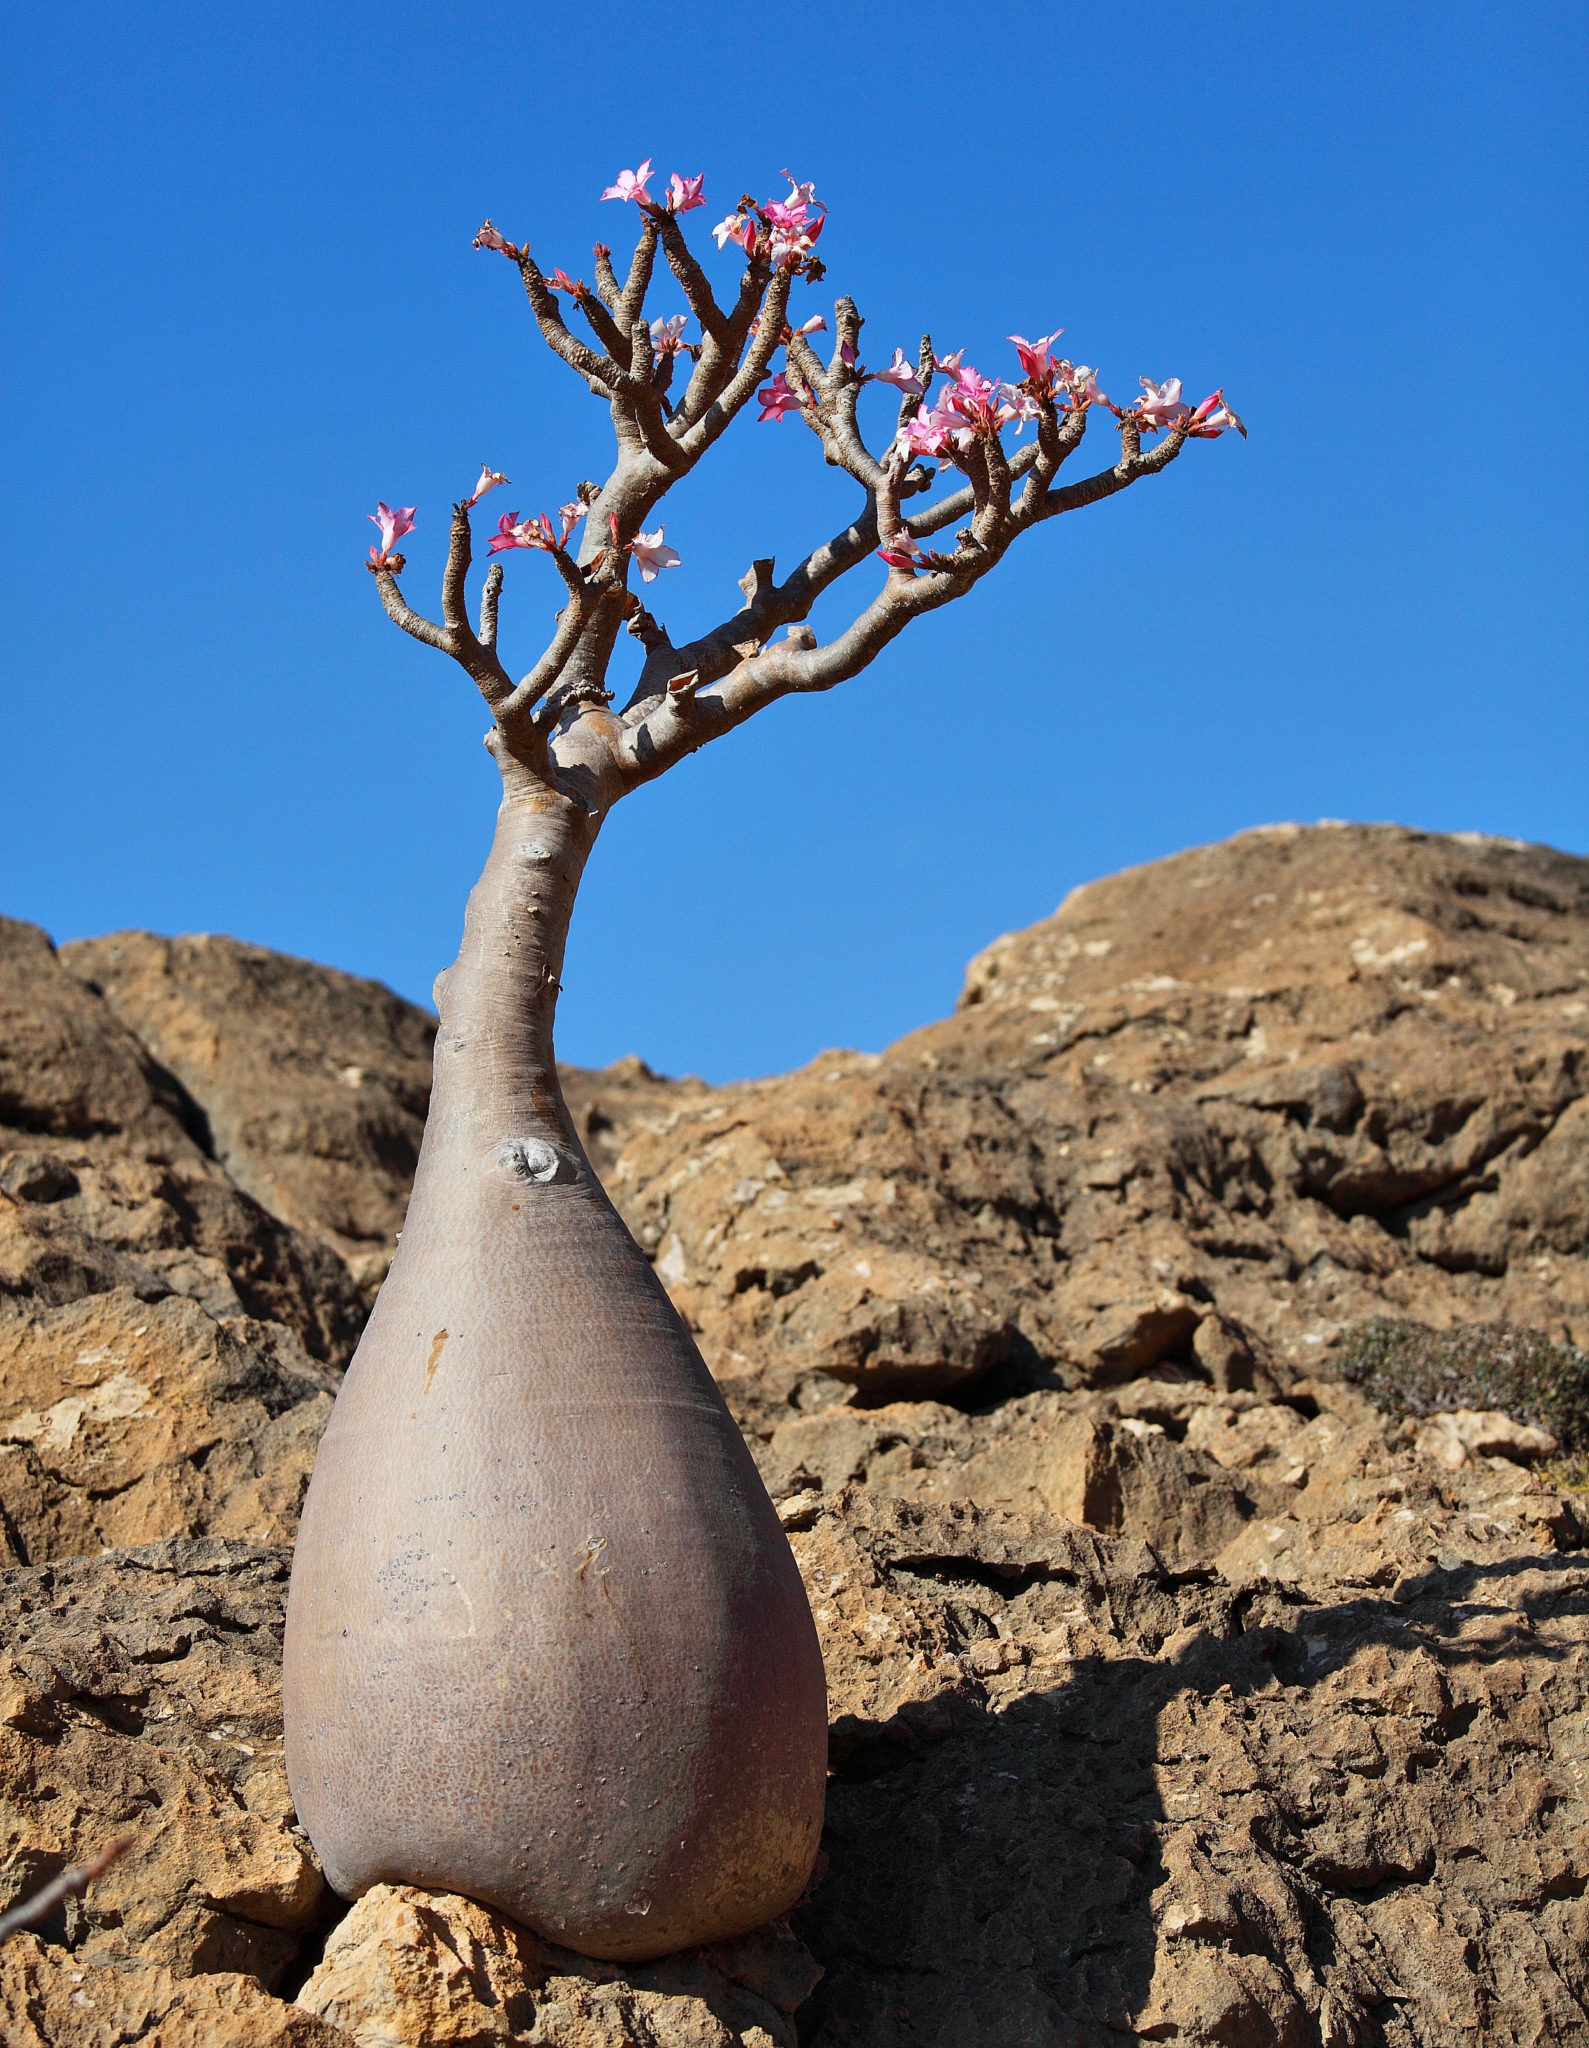 Bottle Tree on Socotra Island, also known as Desert Rose